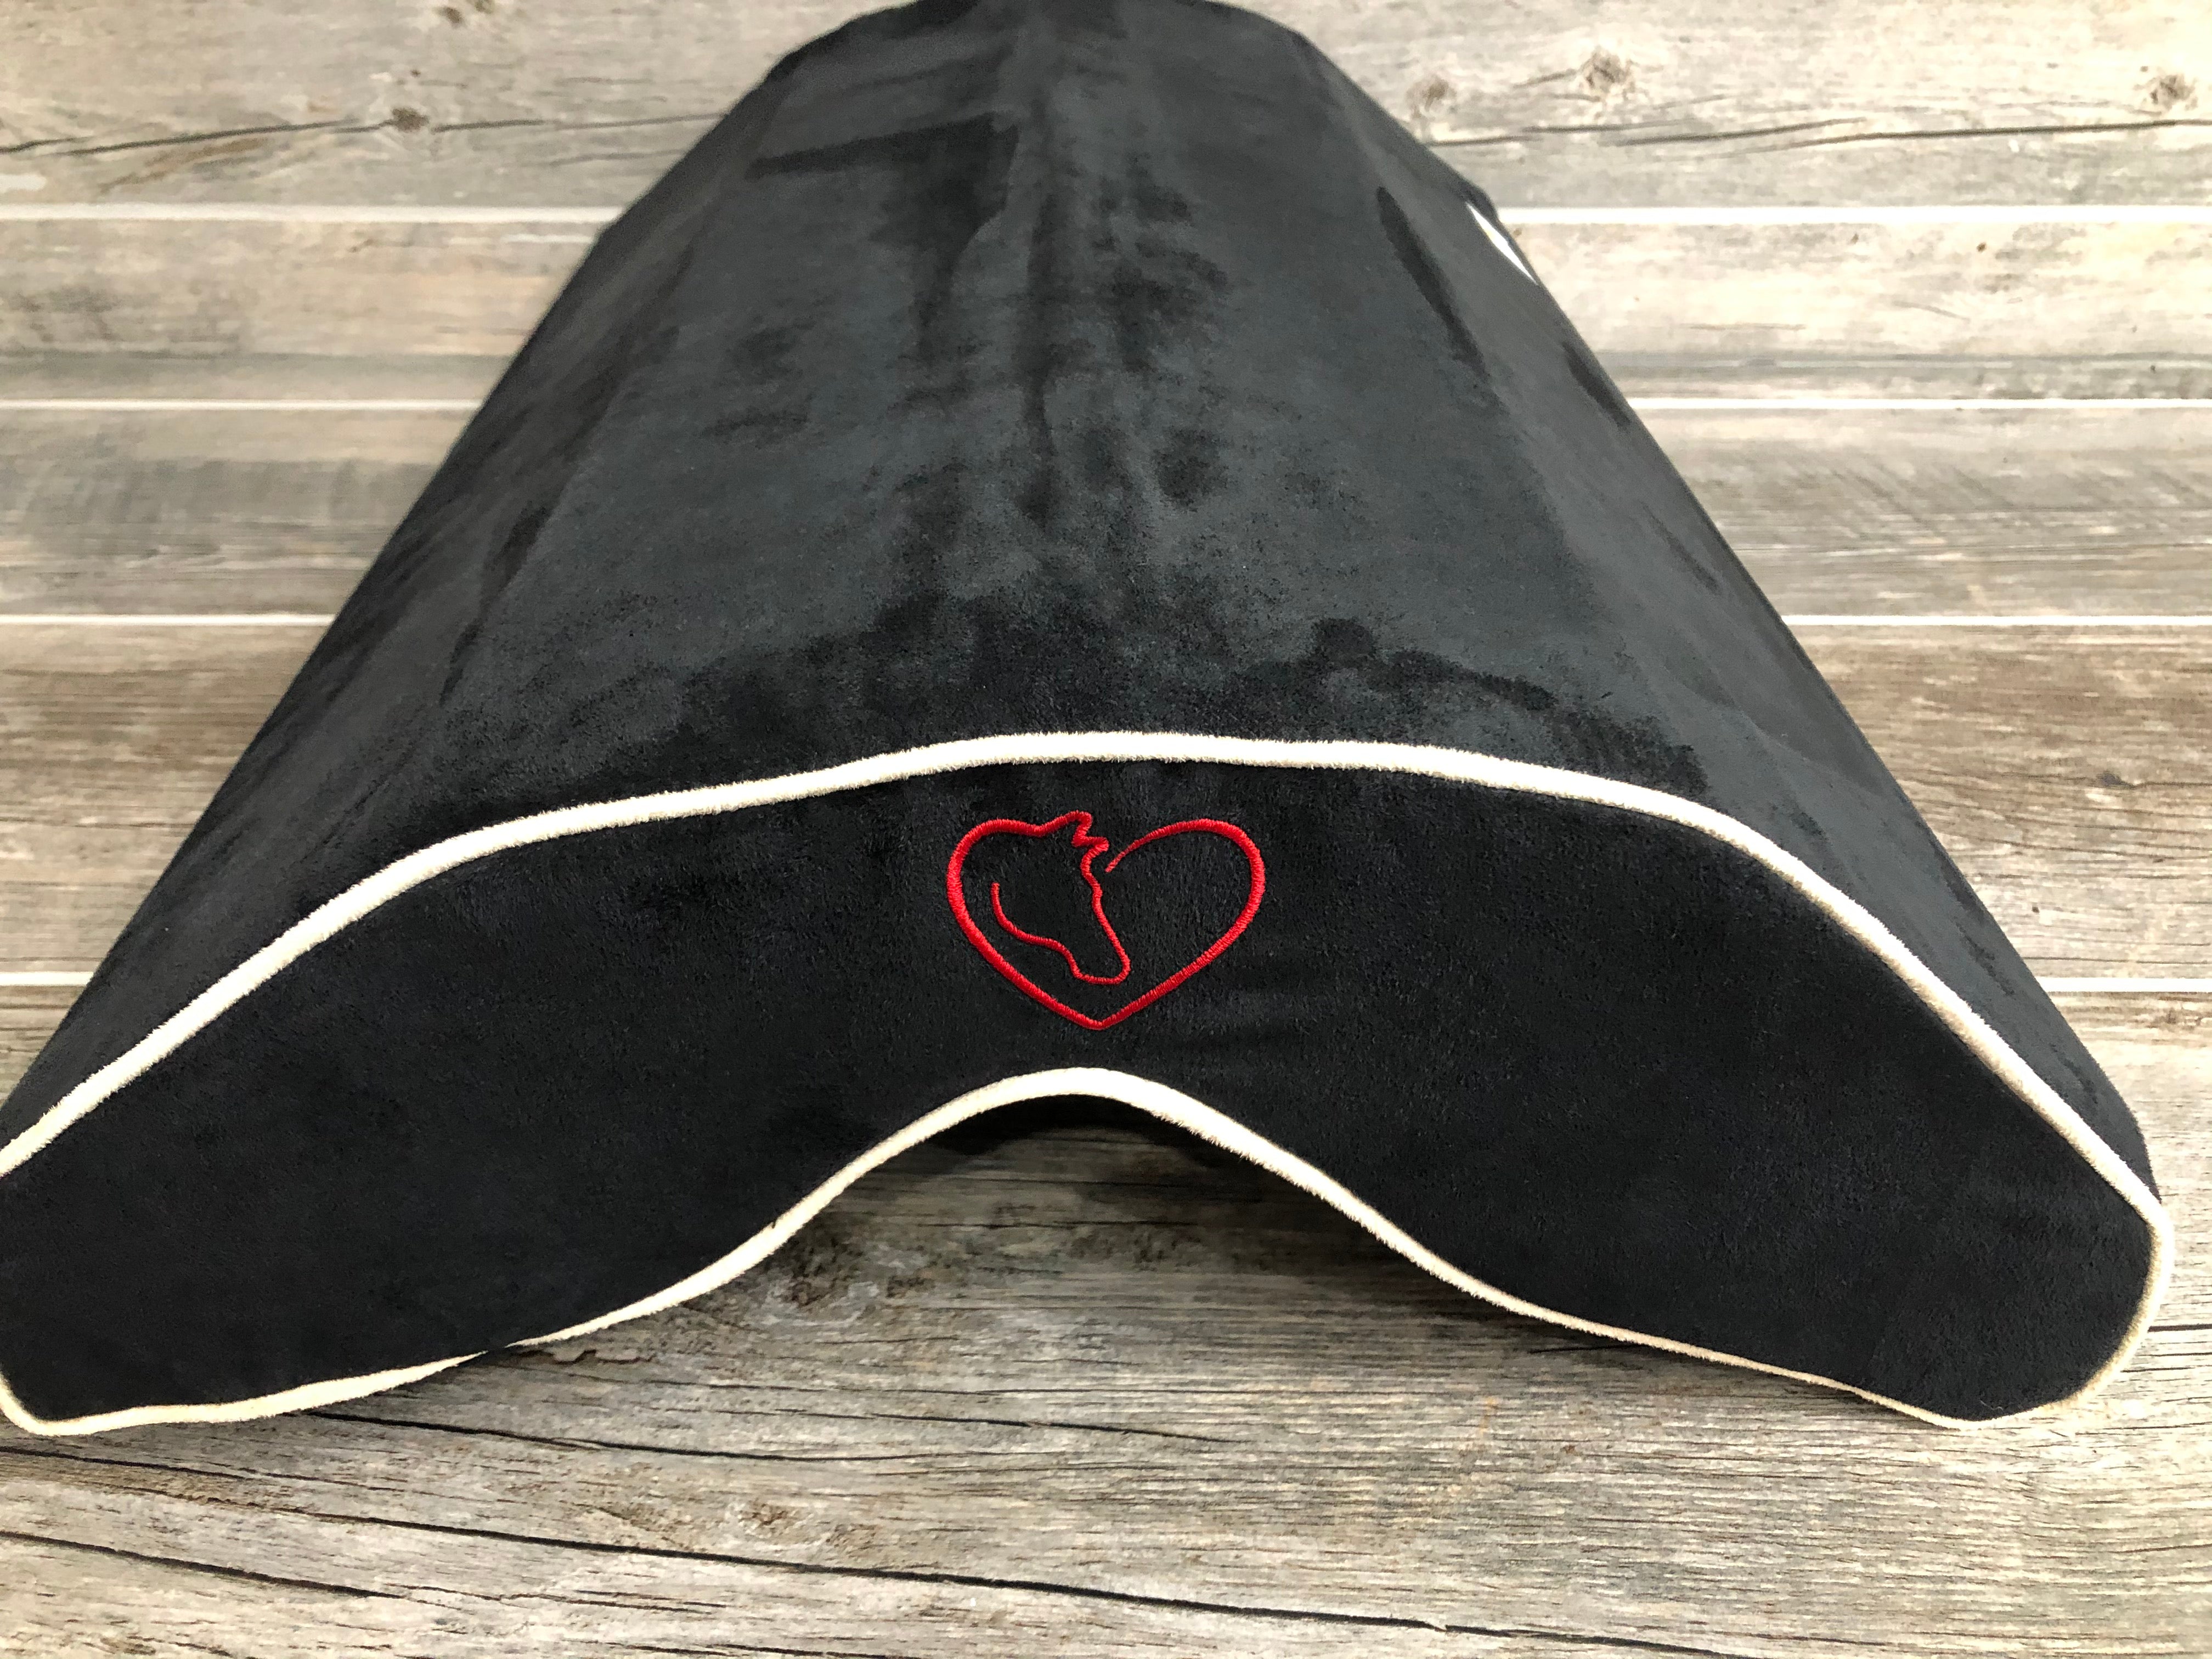 SaddleMattress Vertex Horse and Heart in Black with Cream Piping